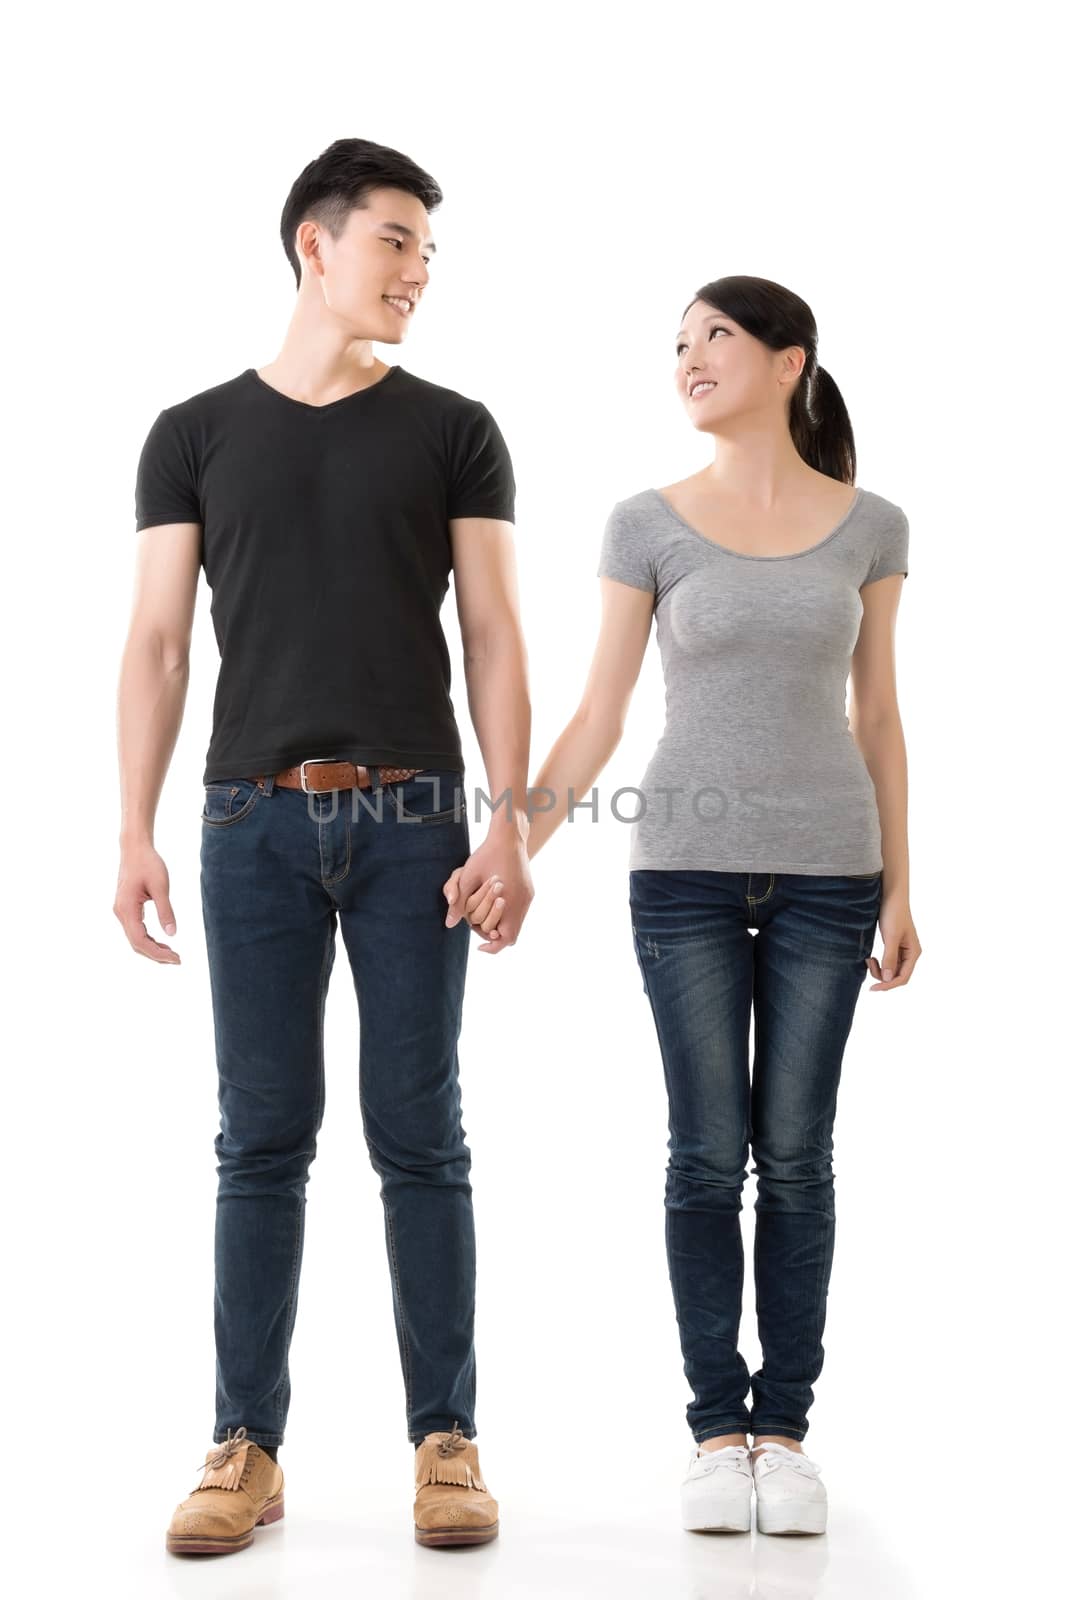 Attractive young Asian couple, full length portrait isolated on white background.